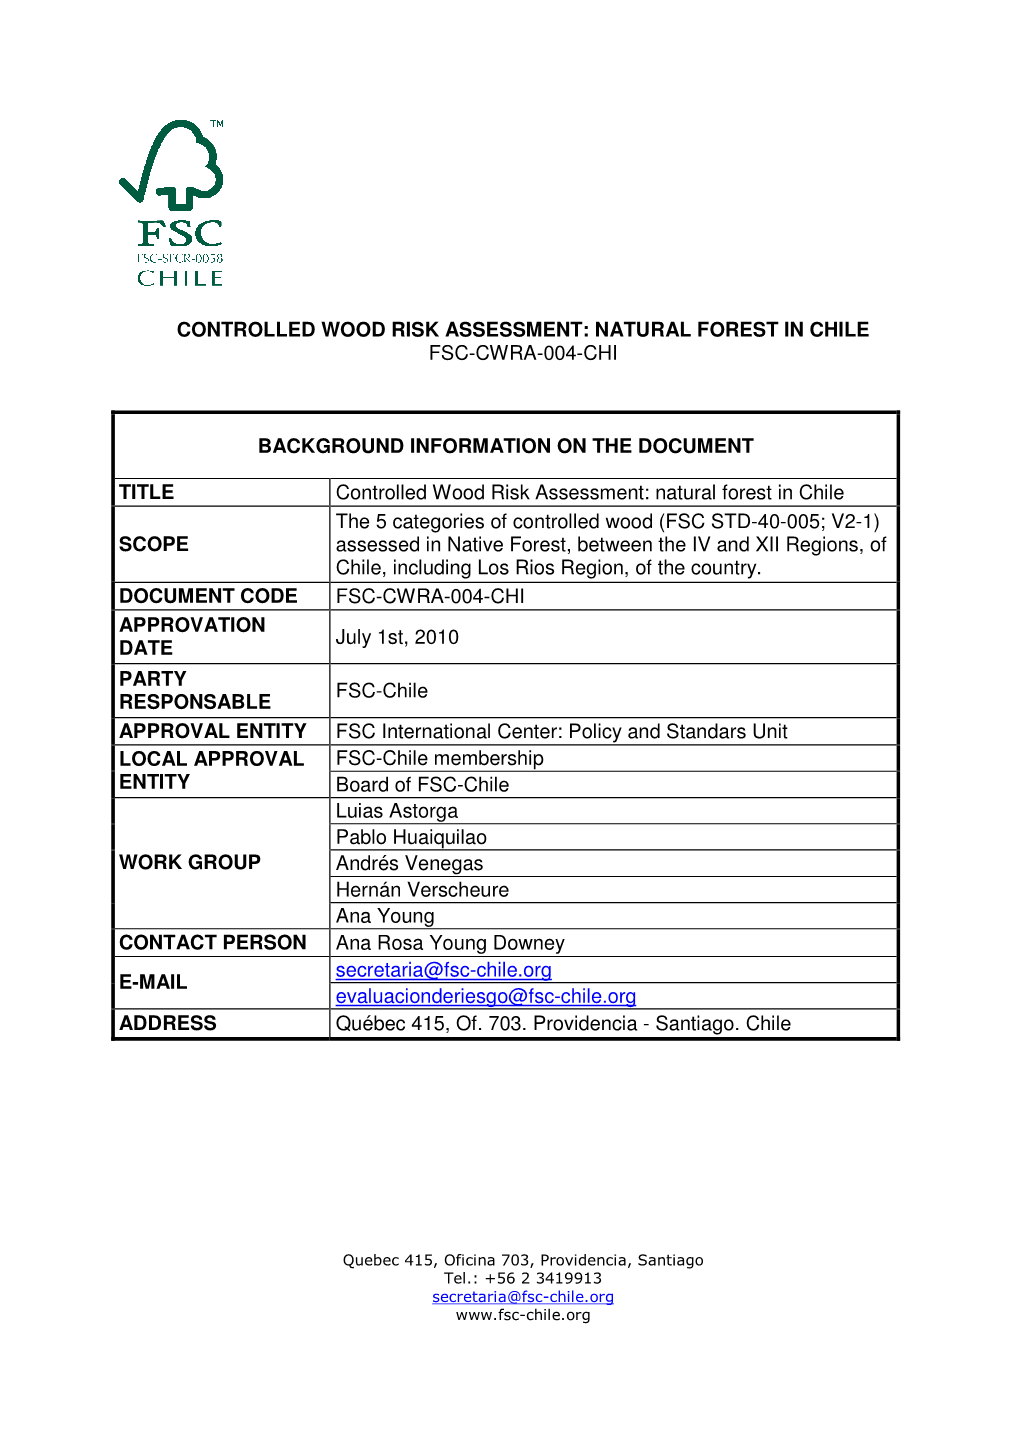 Controlled Wood Risk Assessment: Natural Forest in Chile Fsc-Cwra-004-Chi